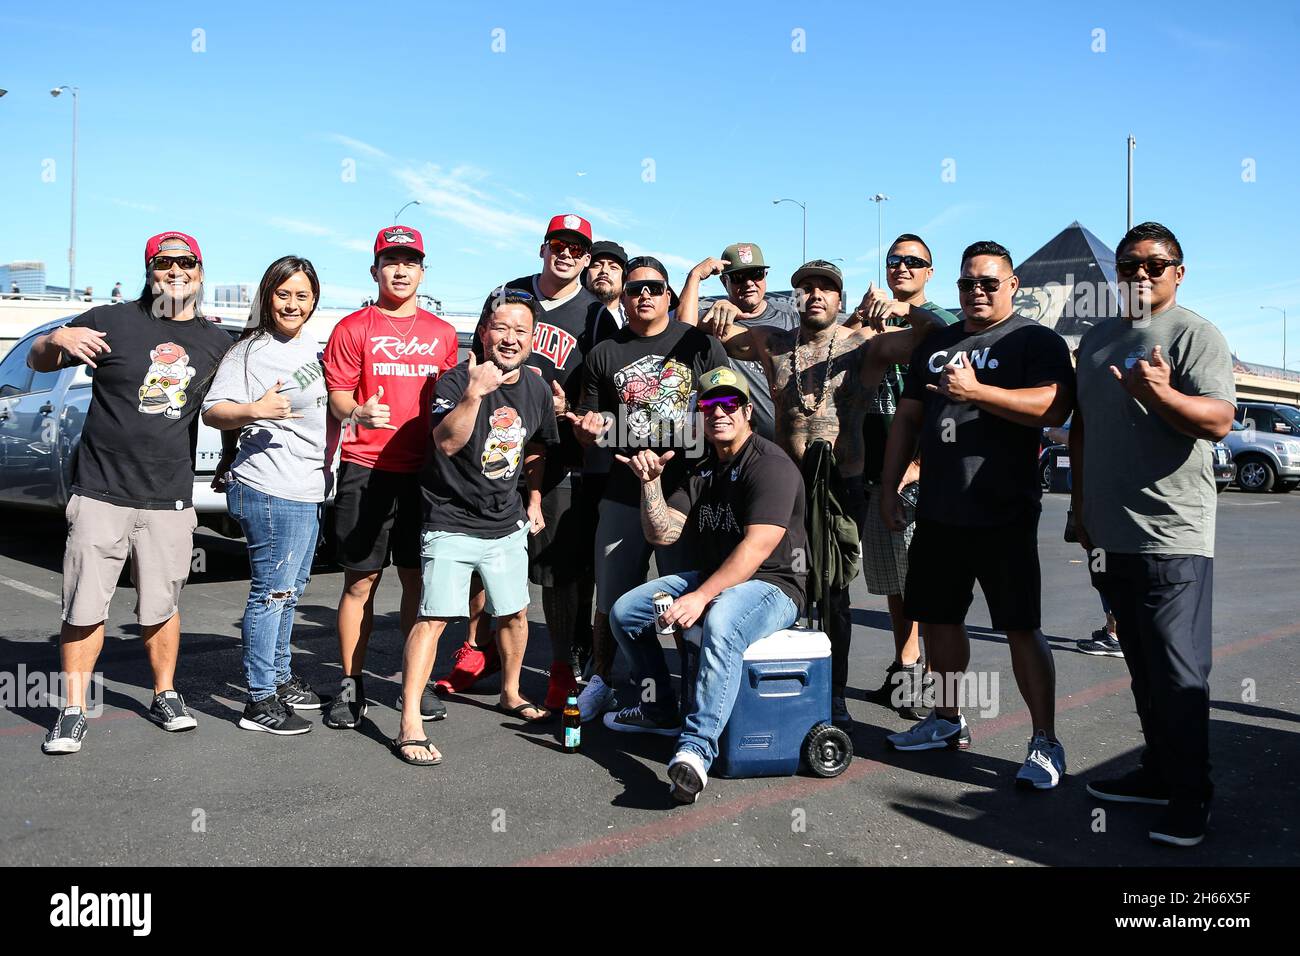 Las Vegas, NV, USA. 13th Nov, 2021. Hawaii Warriors fan Pua Passion (2nd from left) and friends enjoying the tailgating experience prior to the start of the NCAA football game featuring the Hawaii Warriors and the UNLV Rebels at Allegiant Stadium in Las Vegas, NV. Christopher Trim/CSM/Alamy Live News Stock Photo